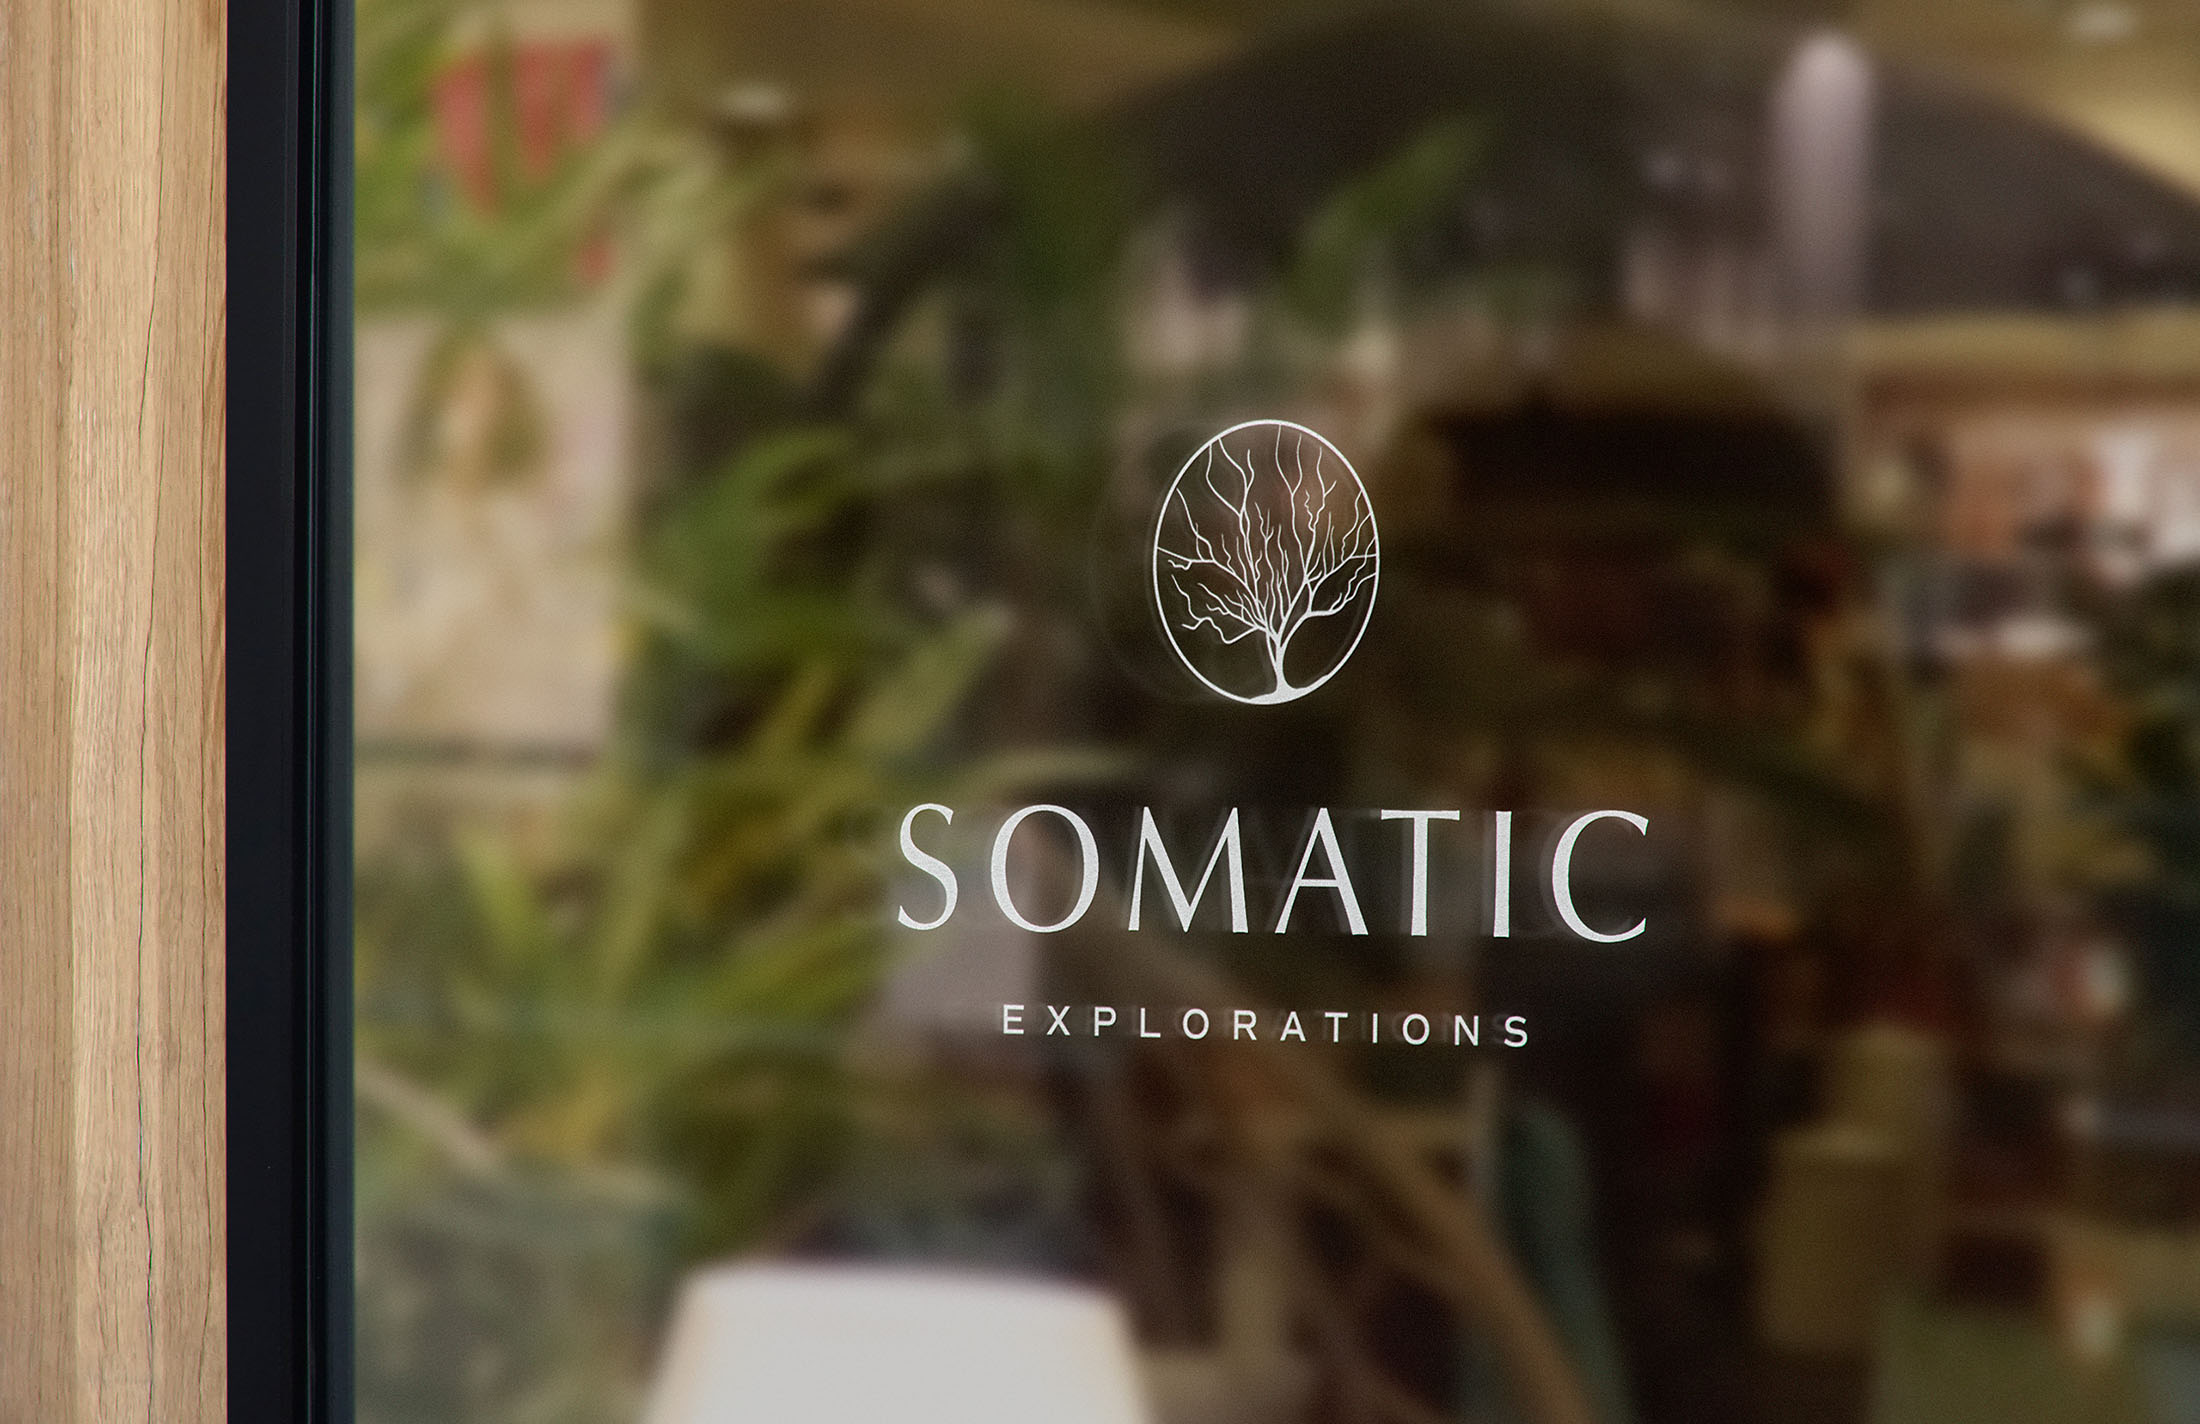 Brand logo business signage - Somatic Explorations - Whiskey and Red Small Business Branding and Website Design Packages